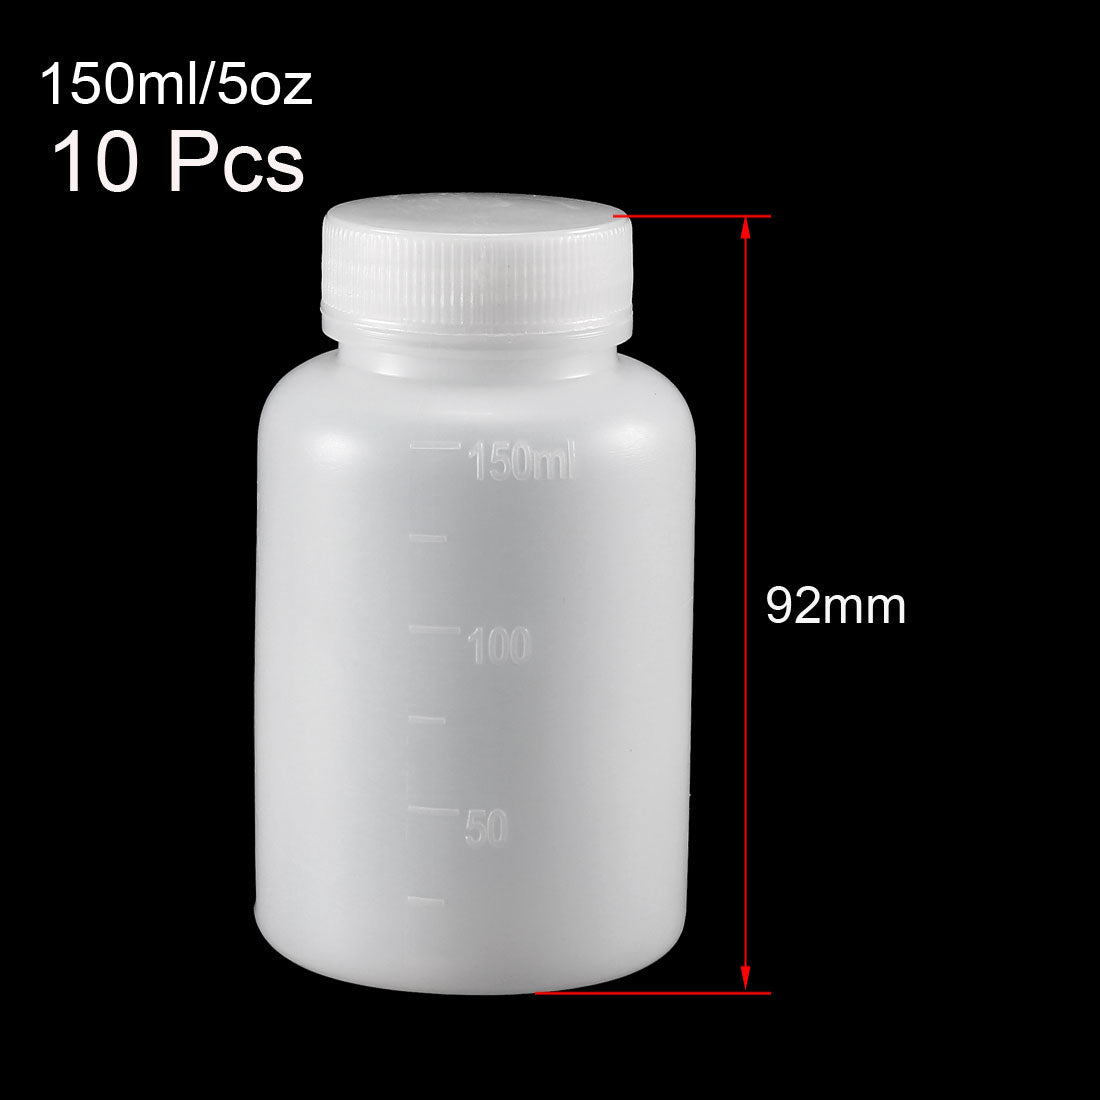 uxcell Uxcell Plastic Lab Chemical Reagent Bottle 150ml/5oz Wide Mouth Sample Sealing Liquid Storage Container 10pcs